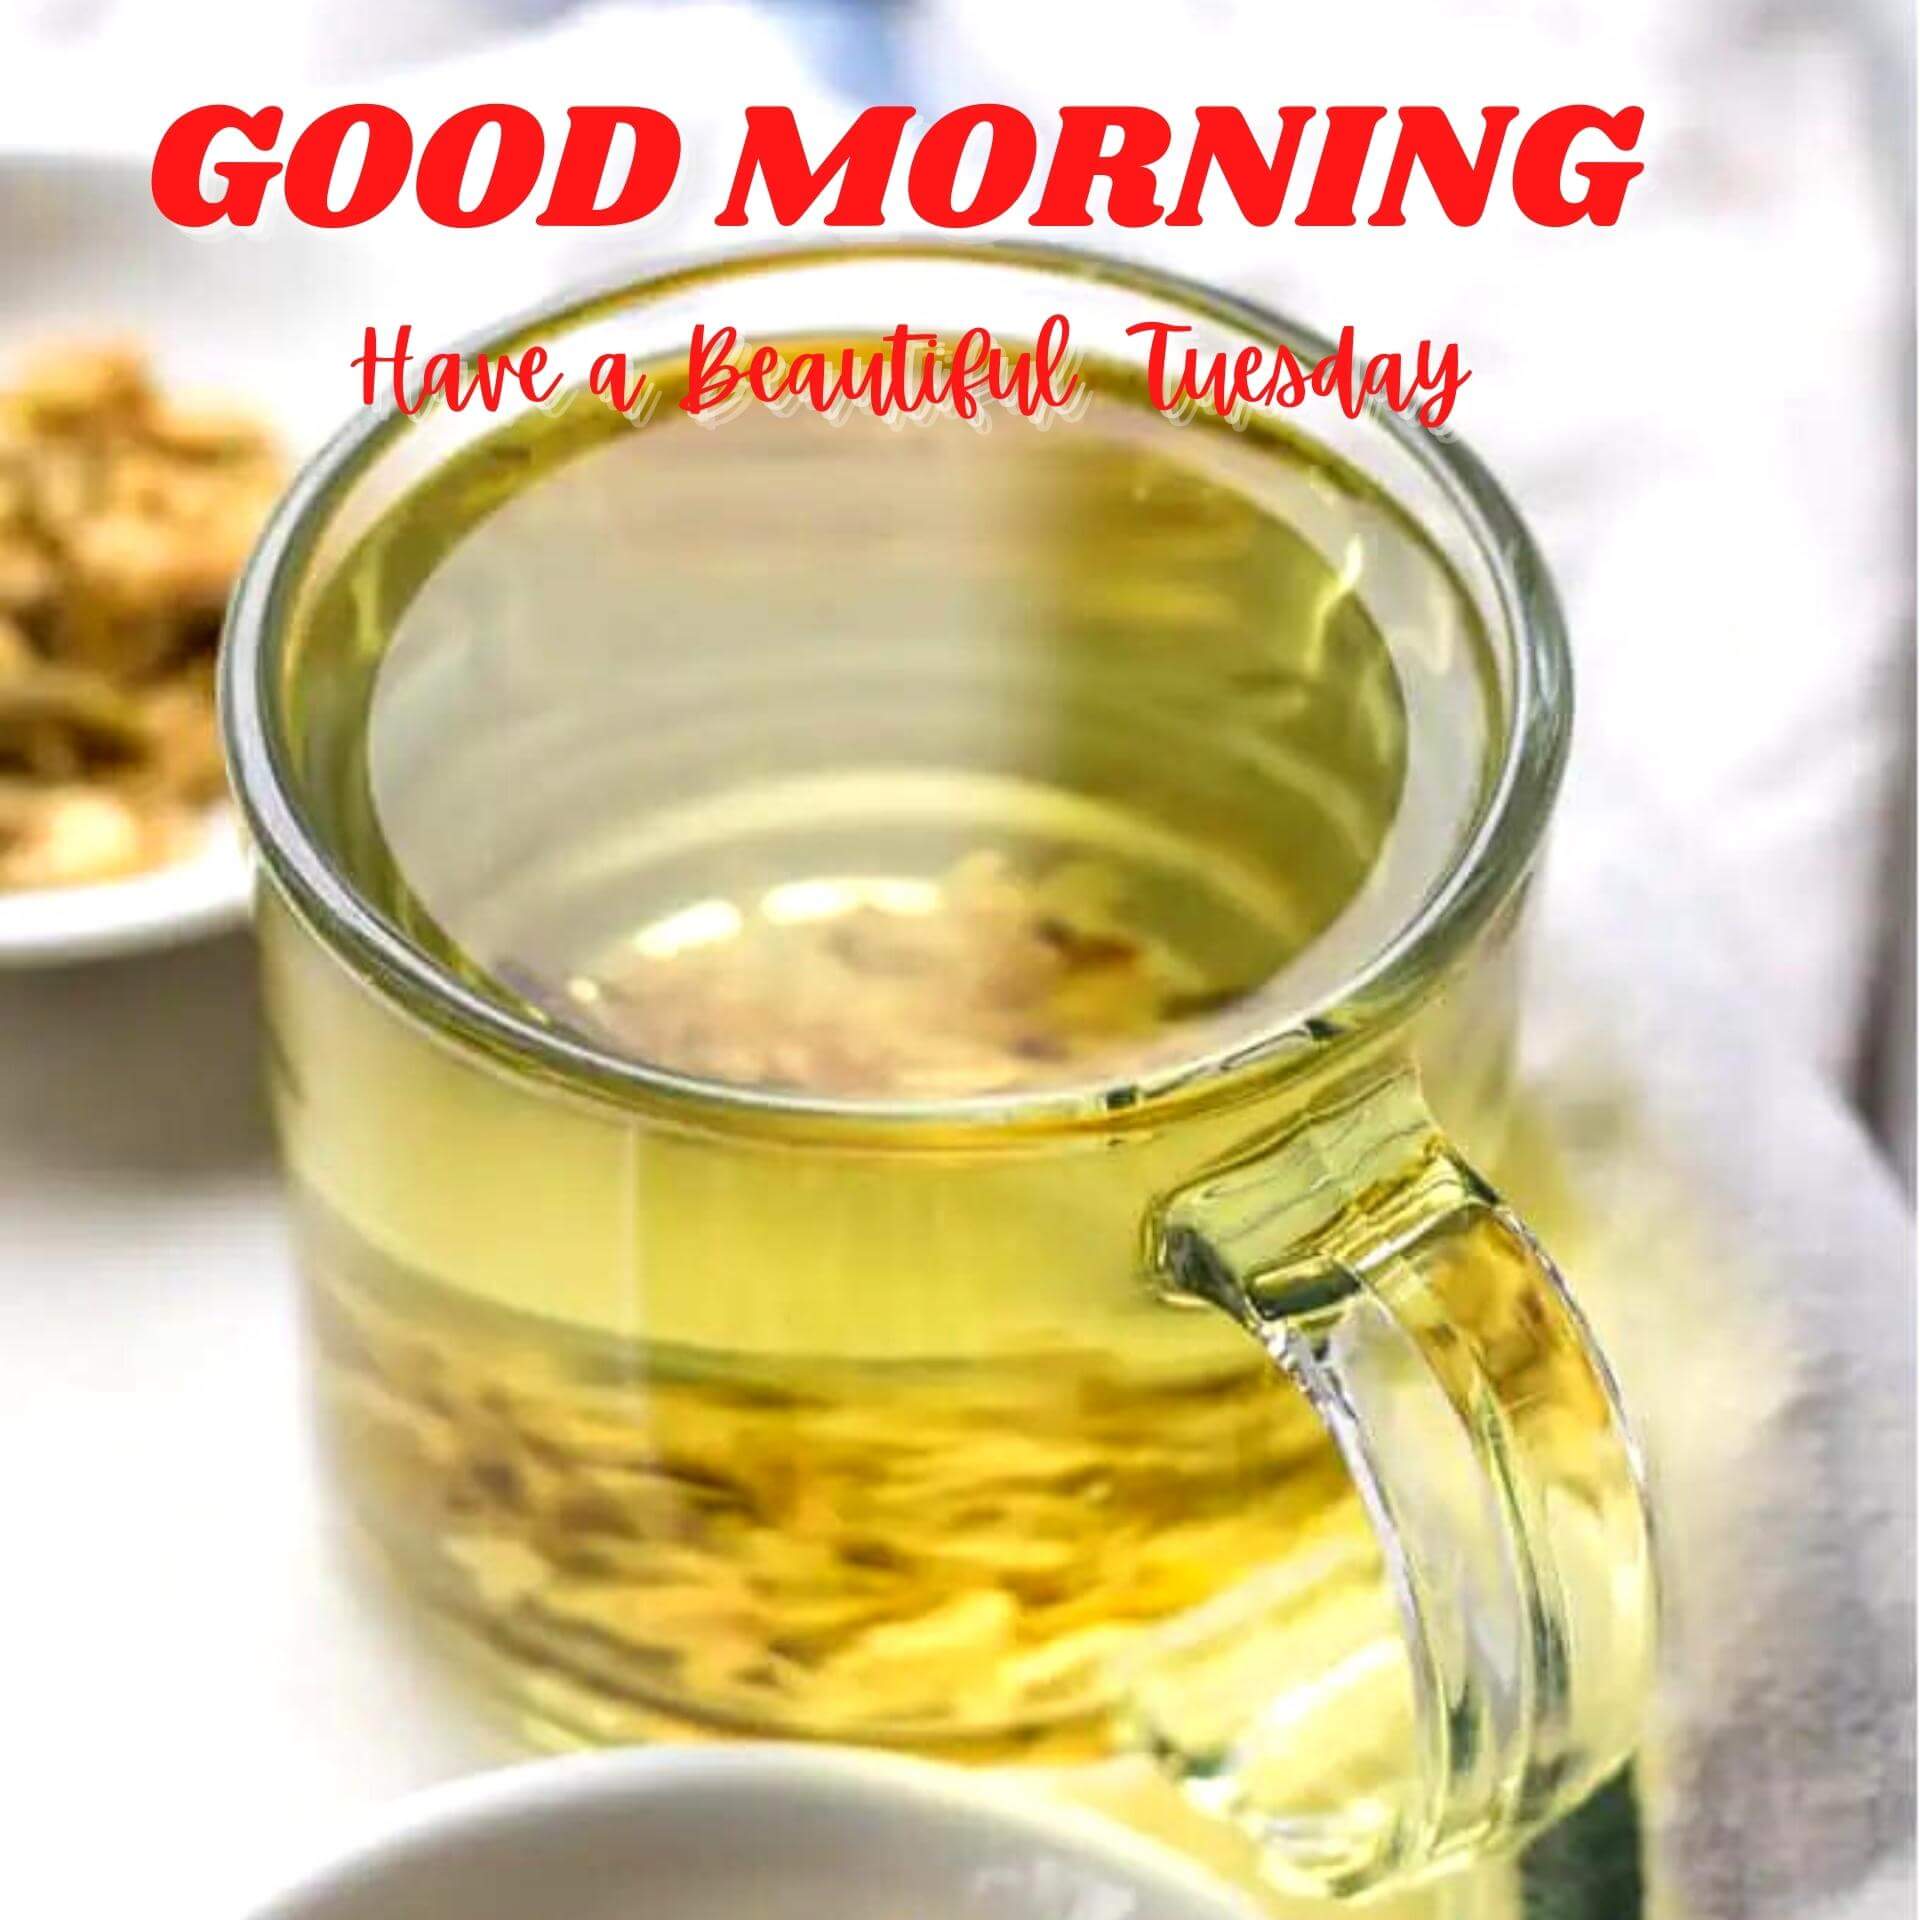 Tuesday good morning photo New Download